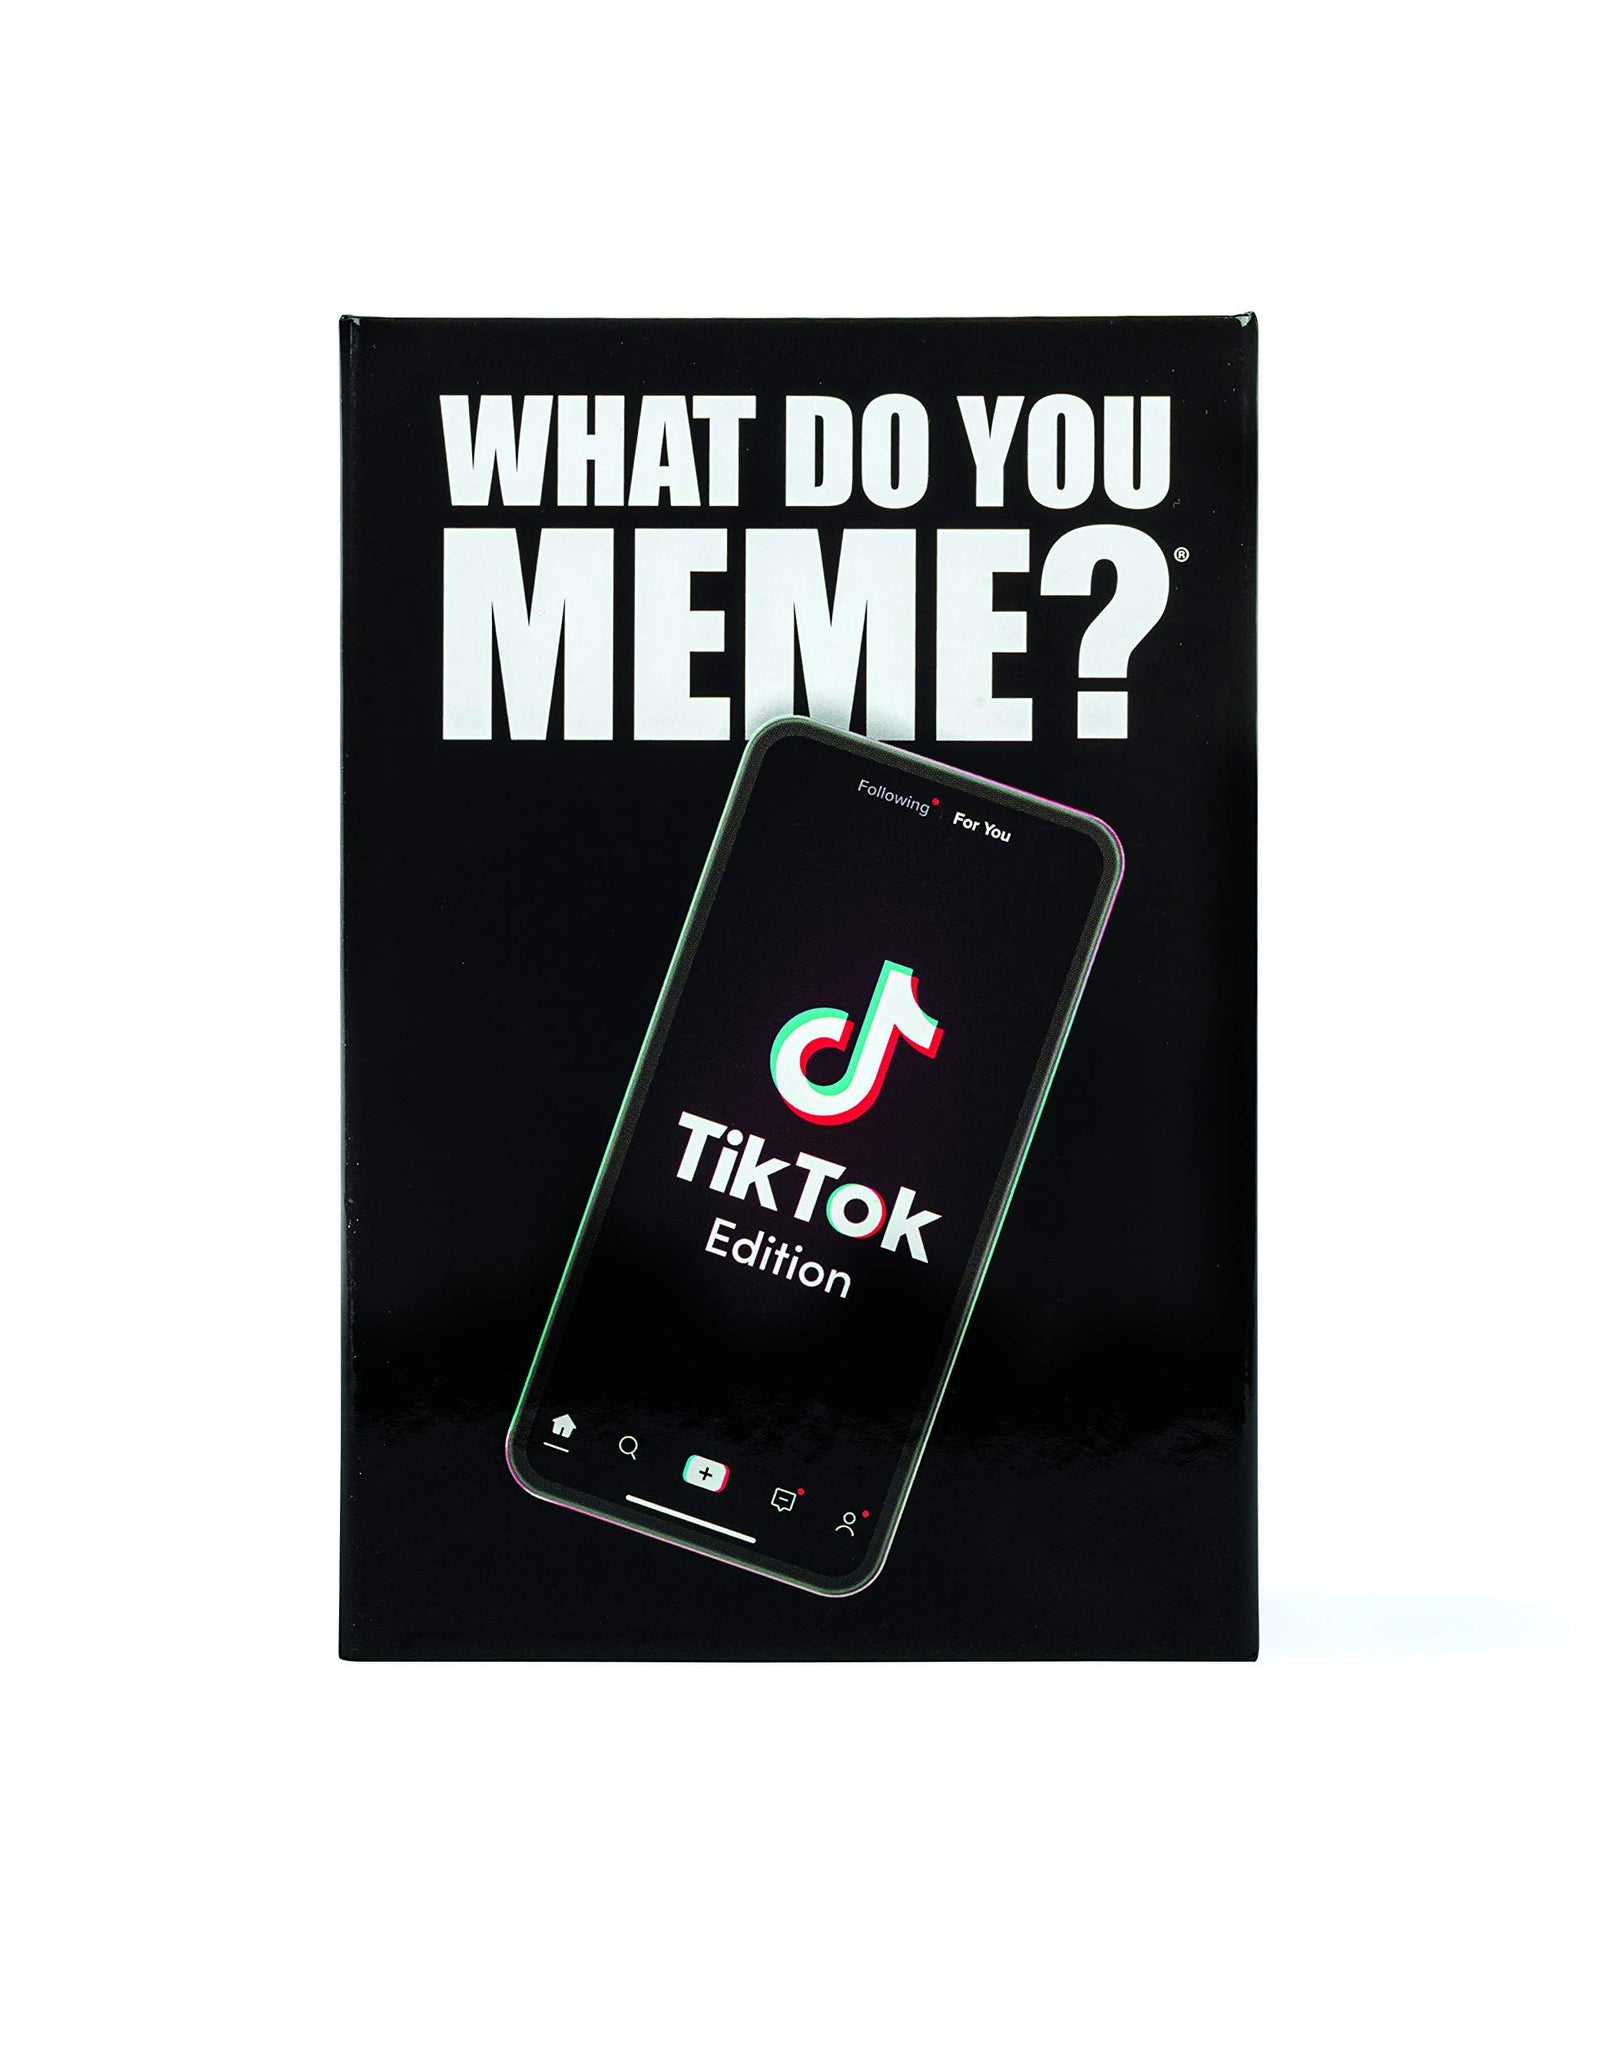 What Do You Meme? TikTok Edition - The TikTok-Themed Version of Our #1 Party Game for Meme Lovers